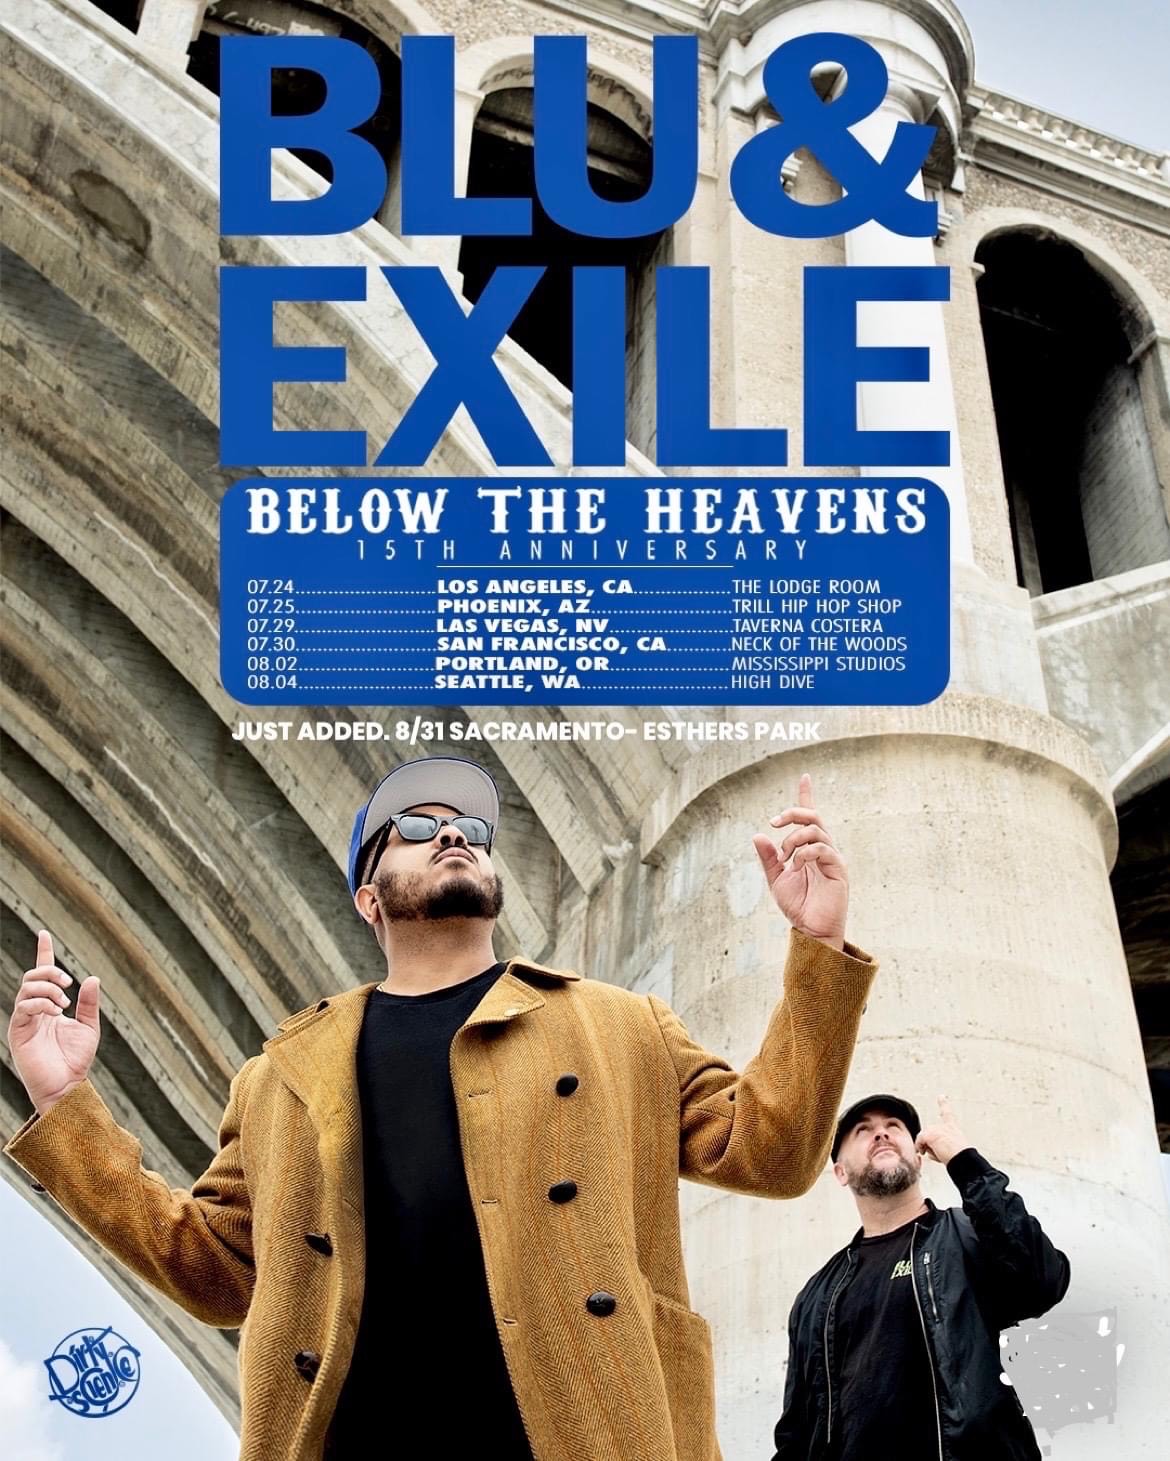 BLU & EXILE “Below the Heavens” 15th Anniversary at The High Dive